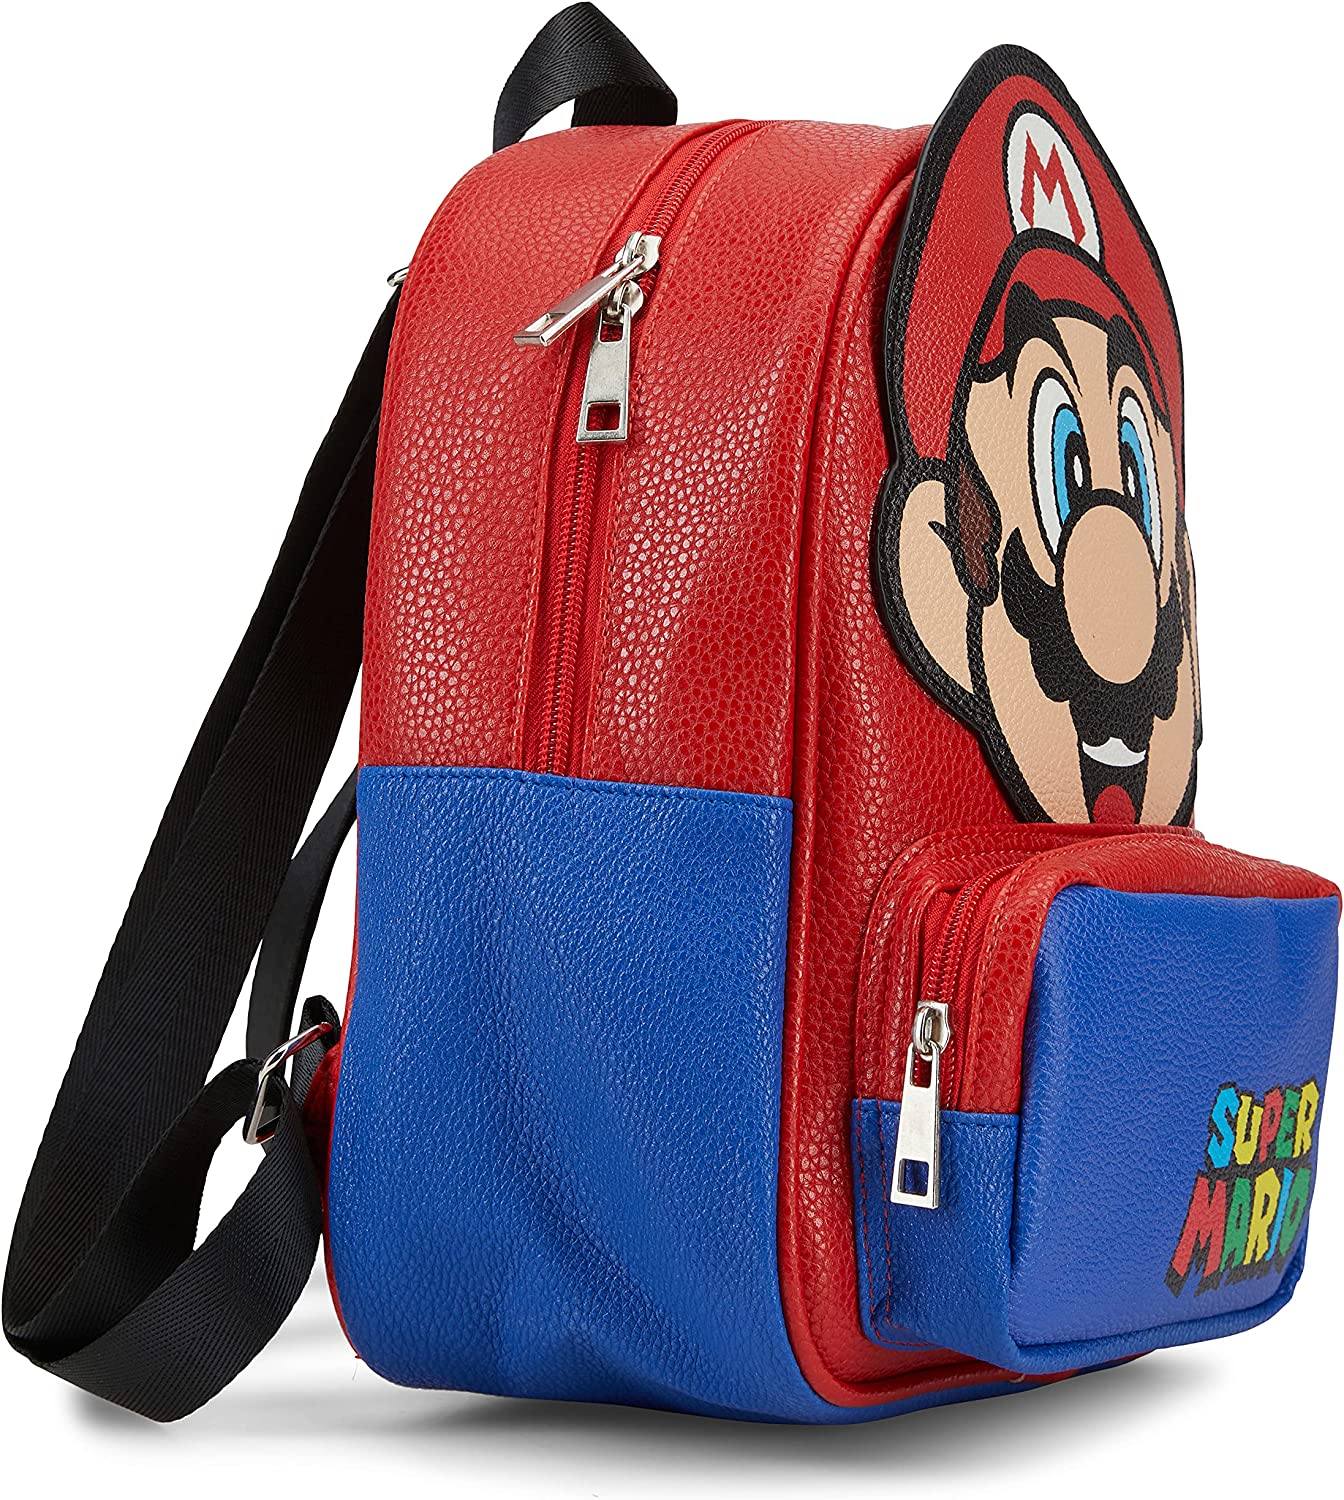 Nintendo's Super Mario Cosplay 10.5 Backpack, Faux Leather PU with 3D Features, Red & Blue - image 4 of 6